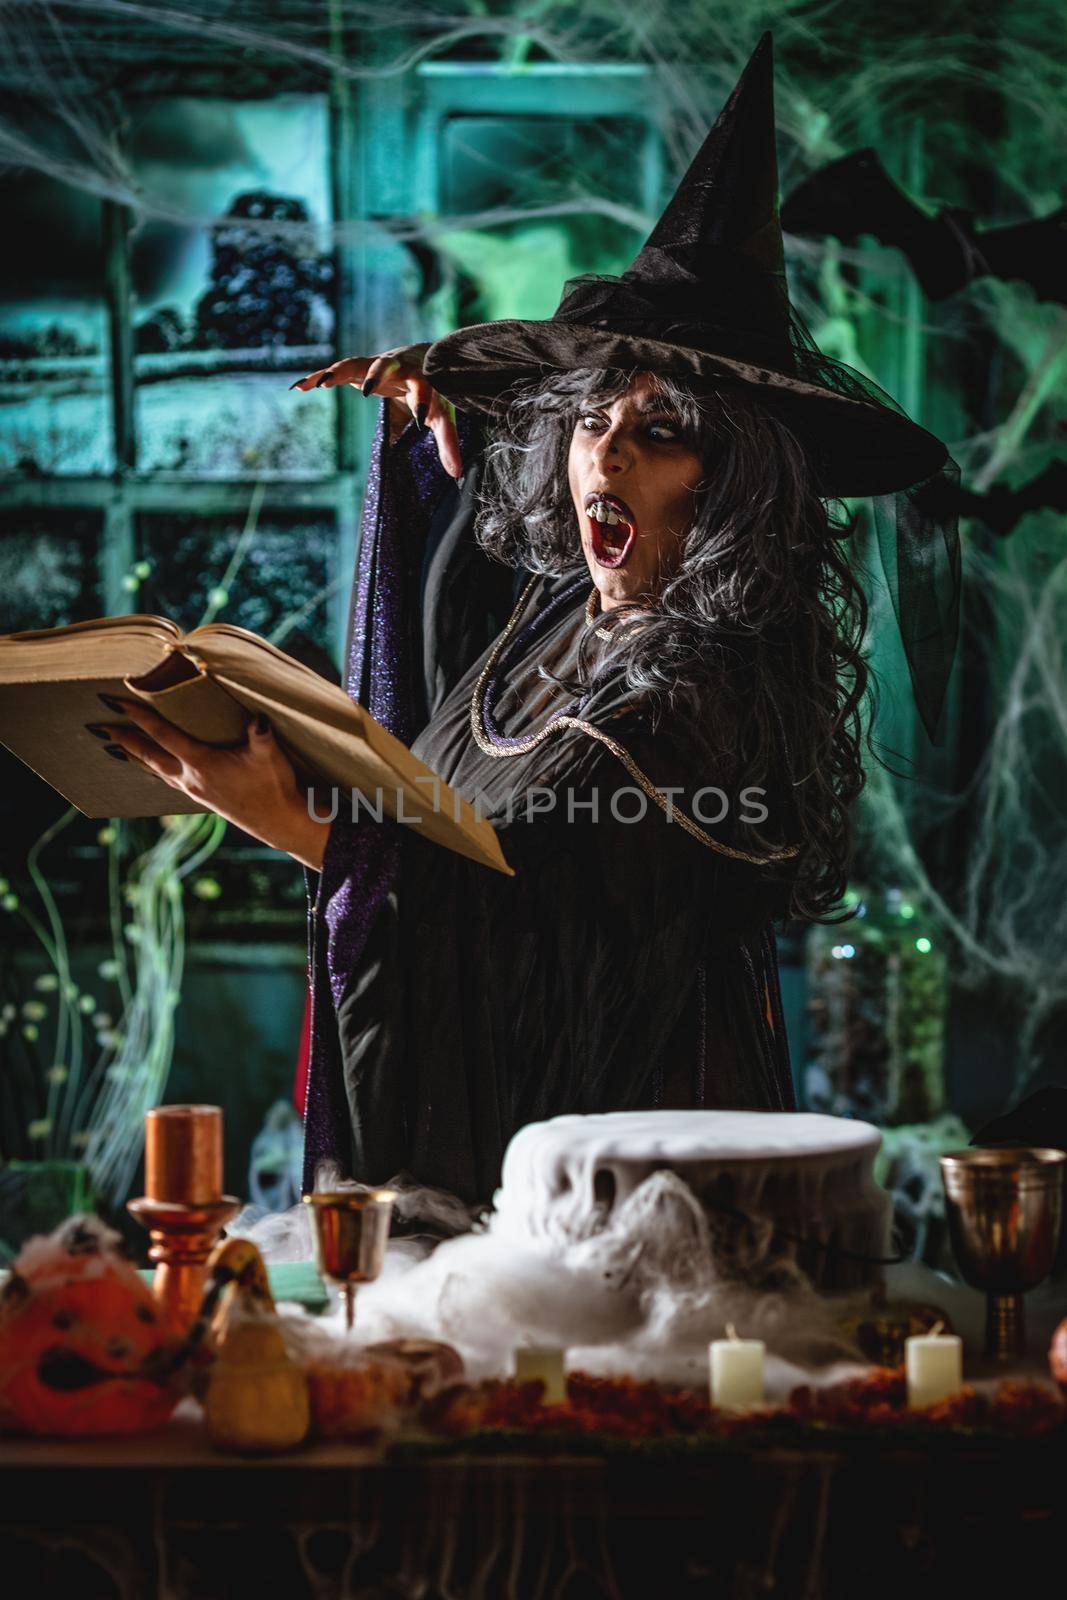 Witch with awfully face in creepy surroundings and smoky green background reading recipe of magic drink sends evil. Halloween concept.